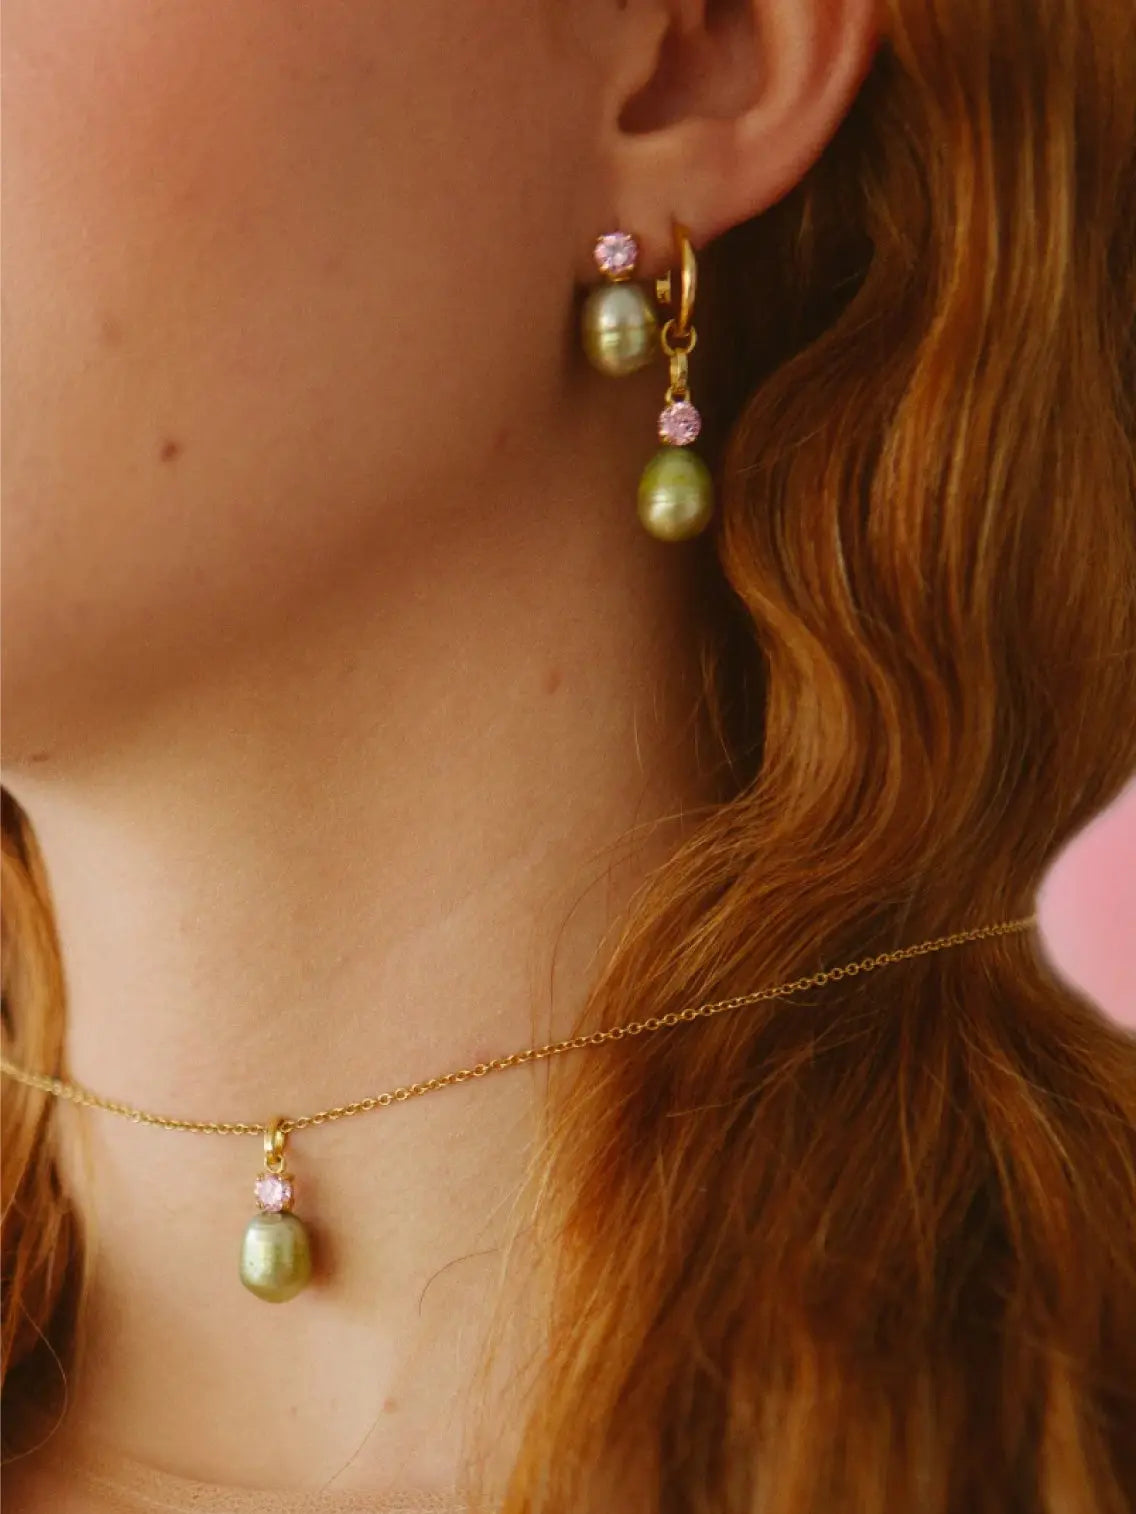 A gold hoop earring from Wilhelmina Garcia, called the Bailarina Hoop Earring, features a hanging light green pearl and a small pink gemstone above it. The earring has an inscription "925" on the inner side of the hoop. The background is white.